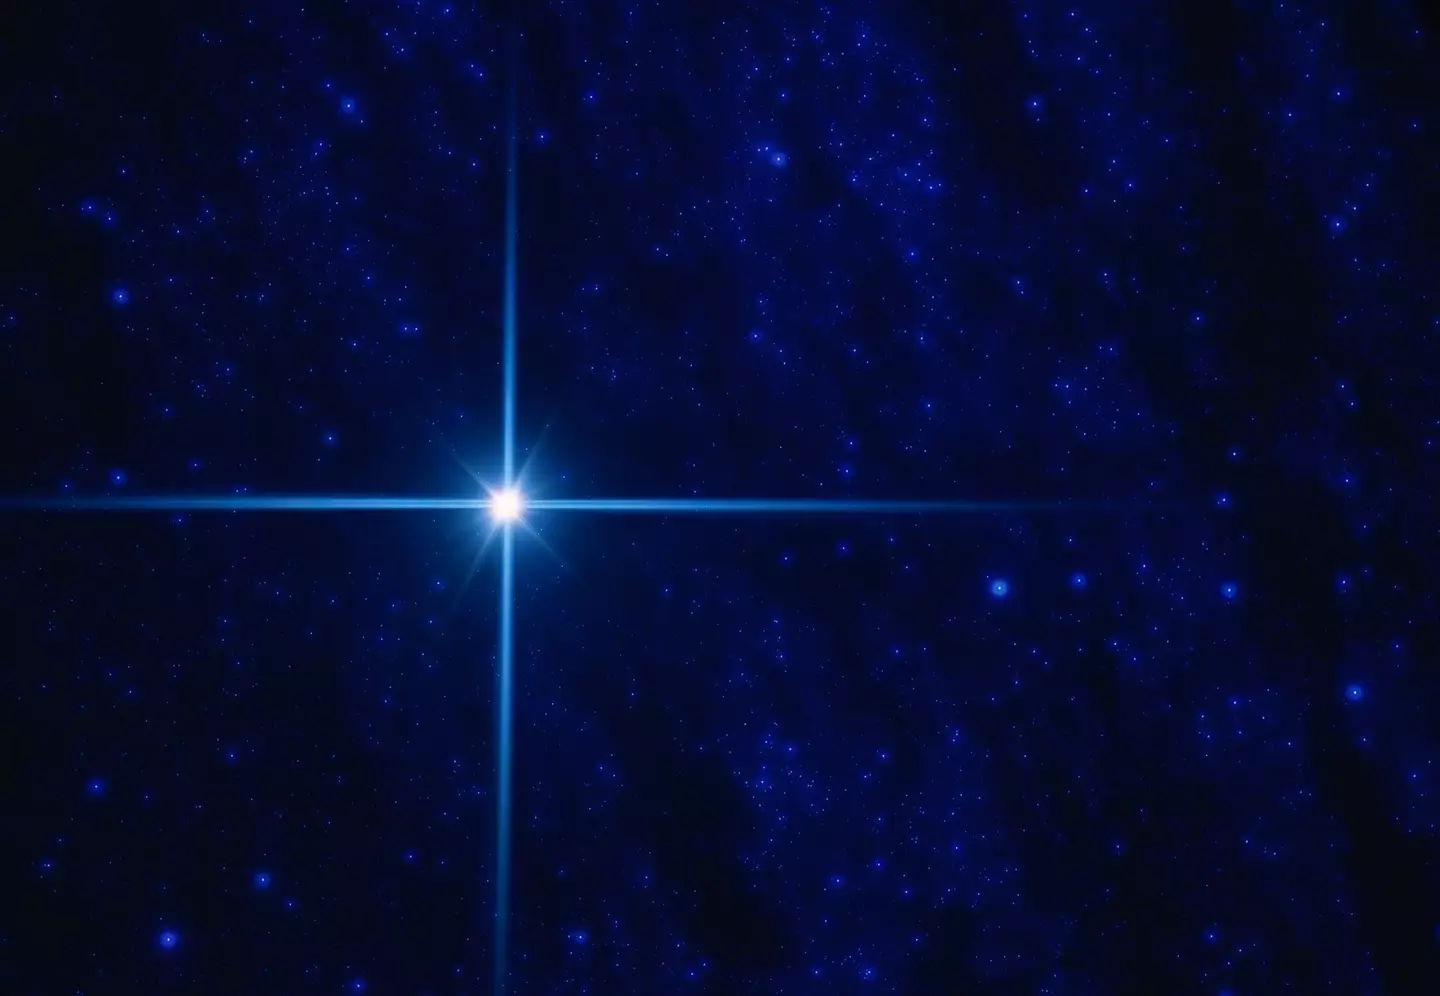 The Star of Bethlehem dates back thousands of years.